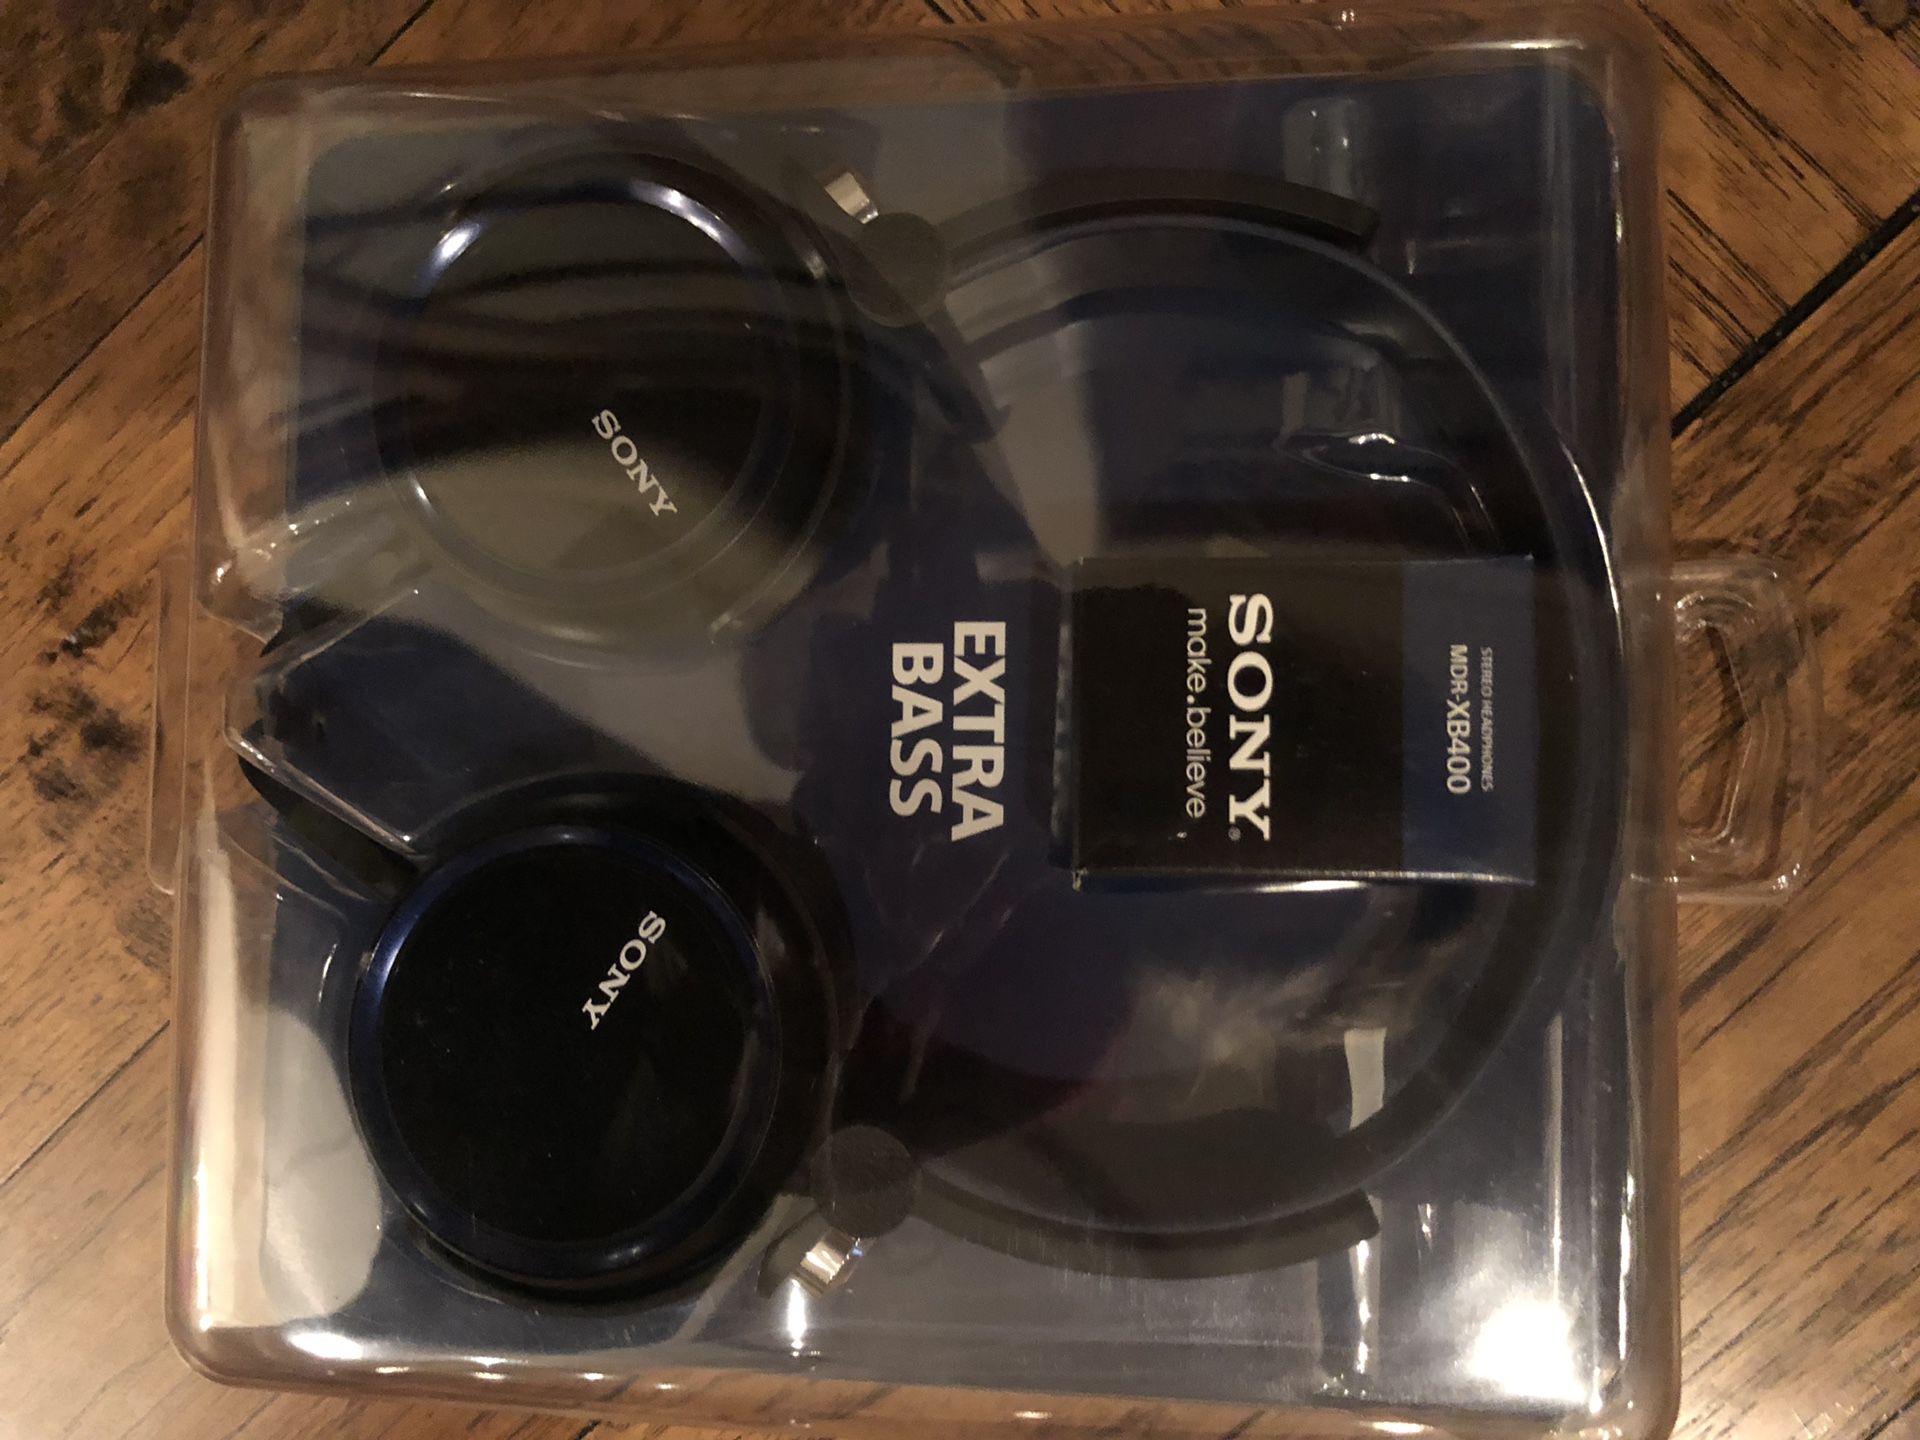 SONY STEREO HEADPHONES WITH EXTRA BASS (MDR-XB400) - BRAND NEW IN BOX